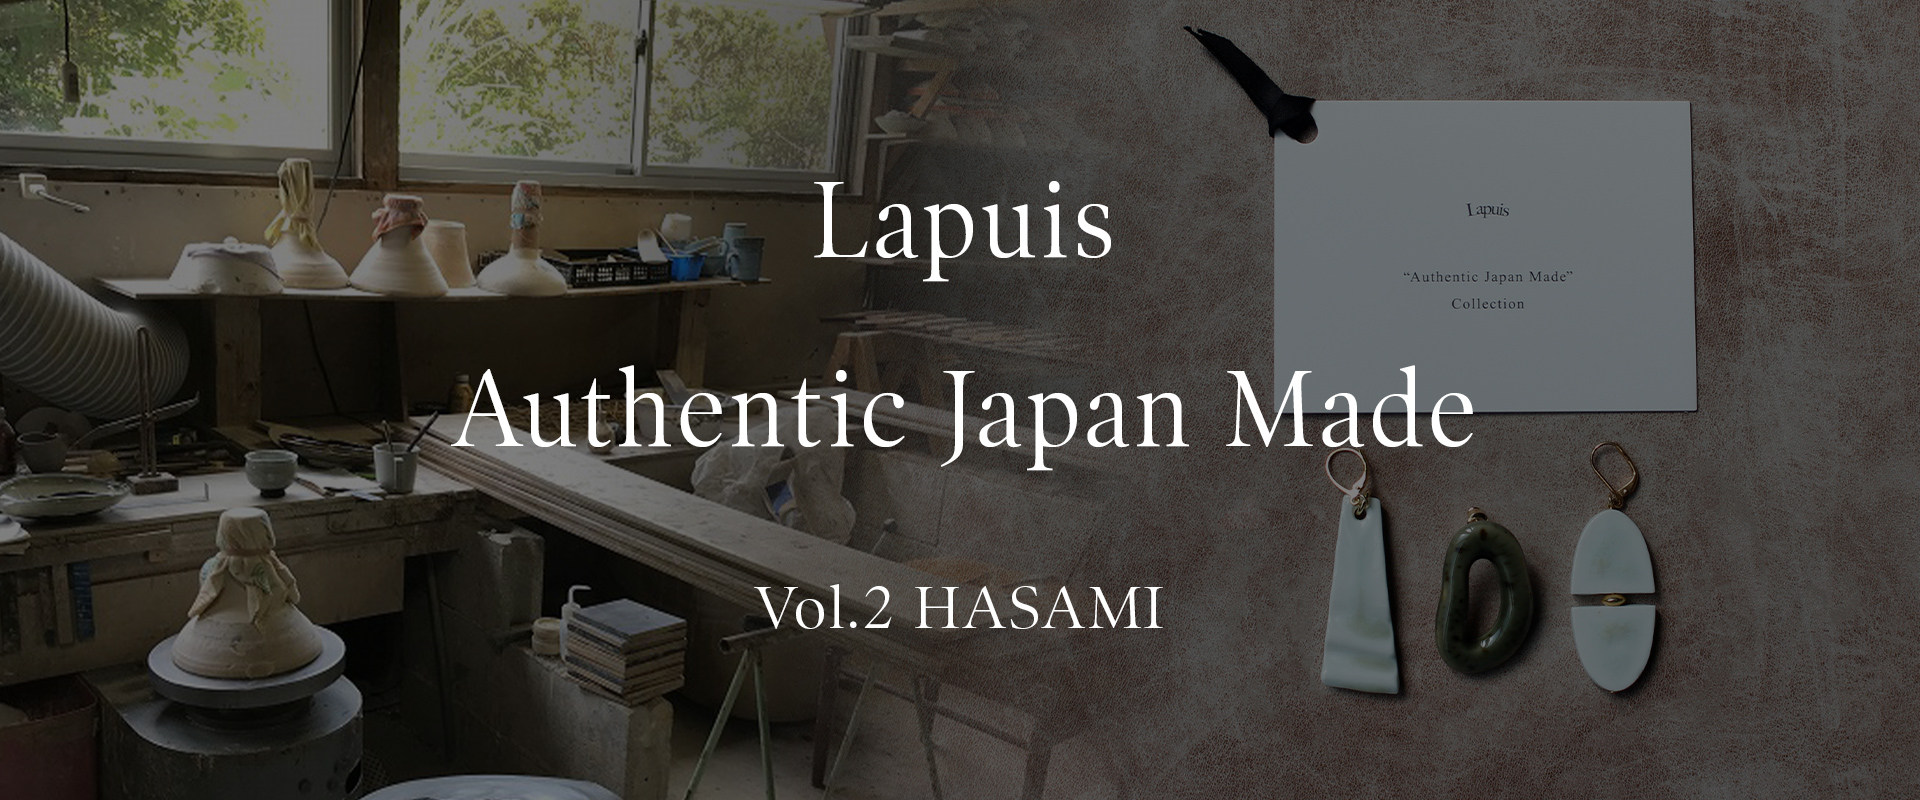 Authentic Japan Made　Vol.2 HASAMI